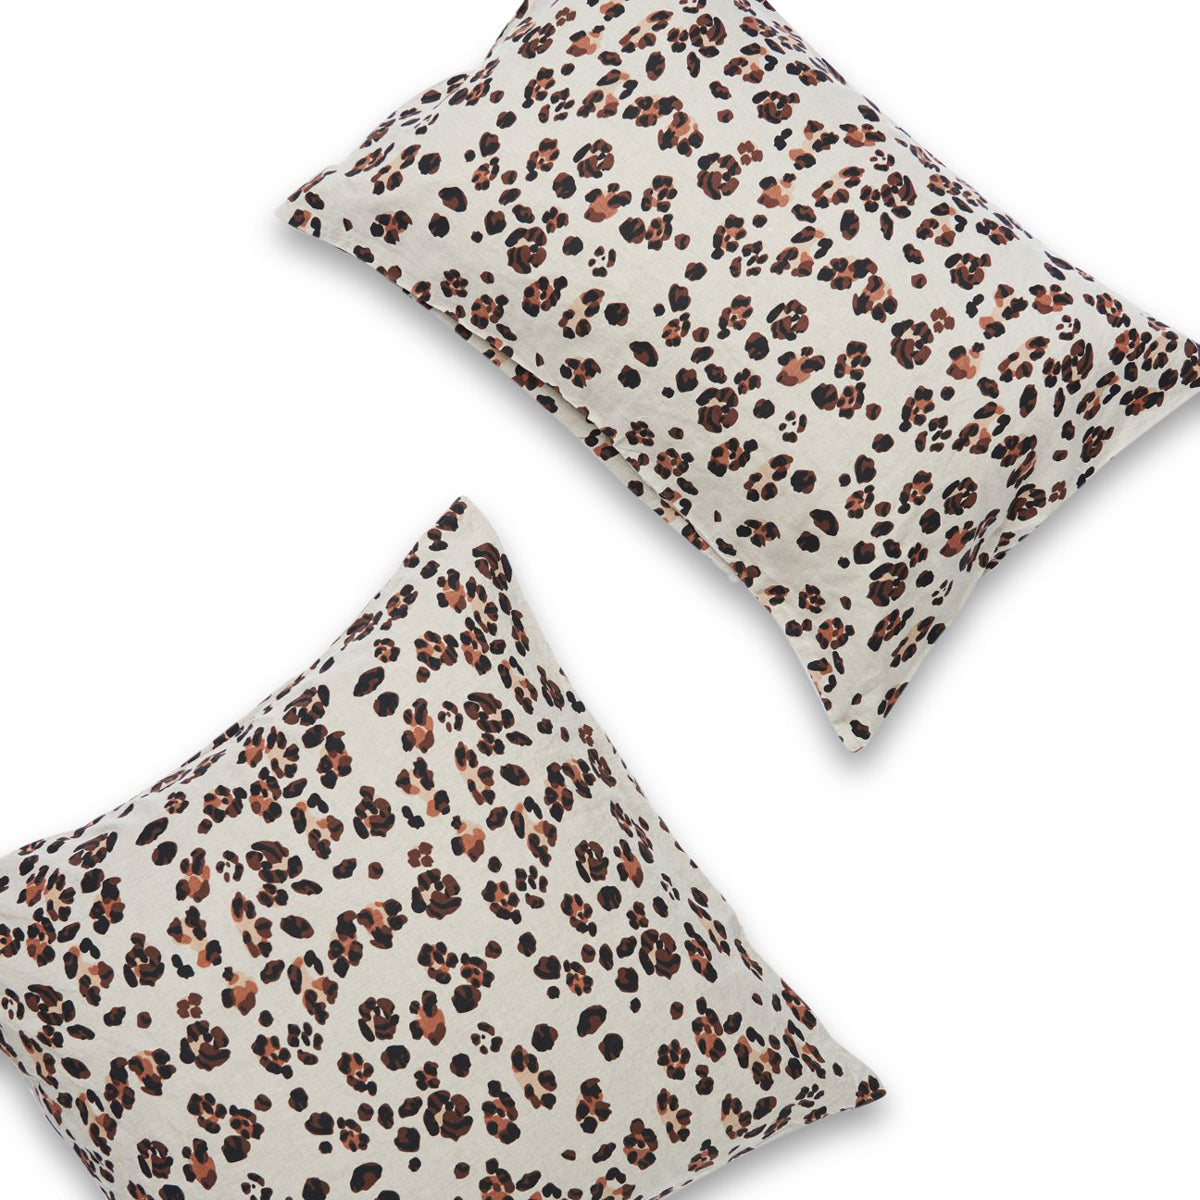 Society of wanderers leopard Pillowcase Sets